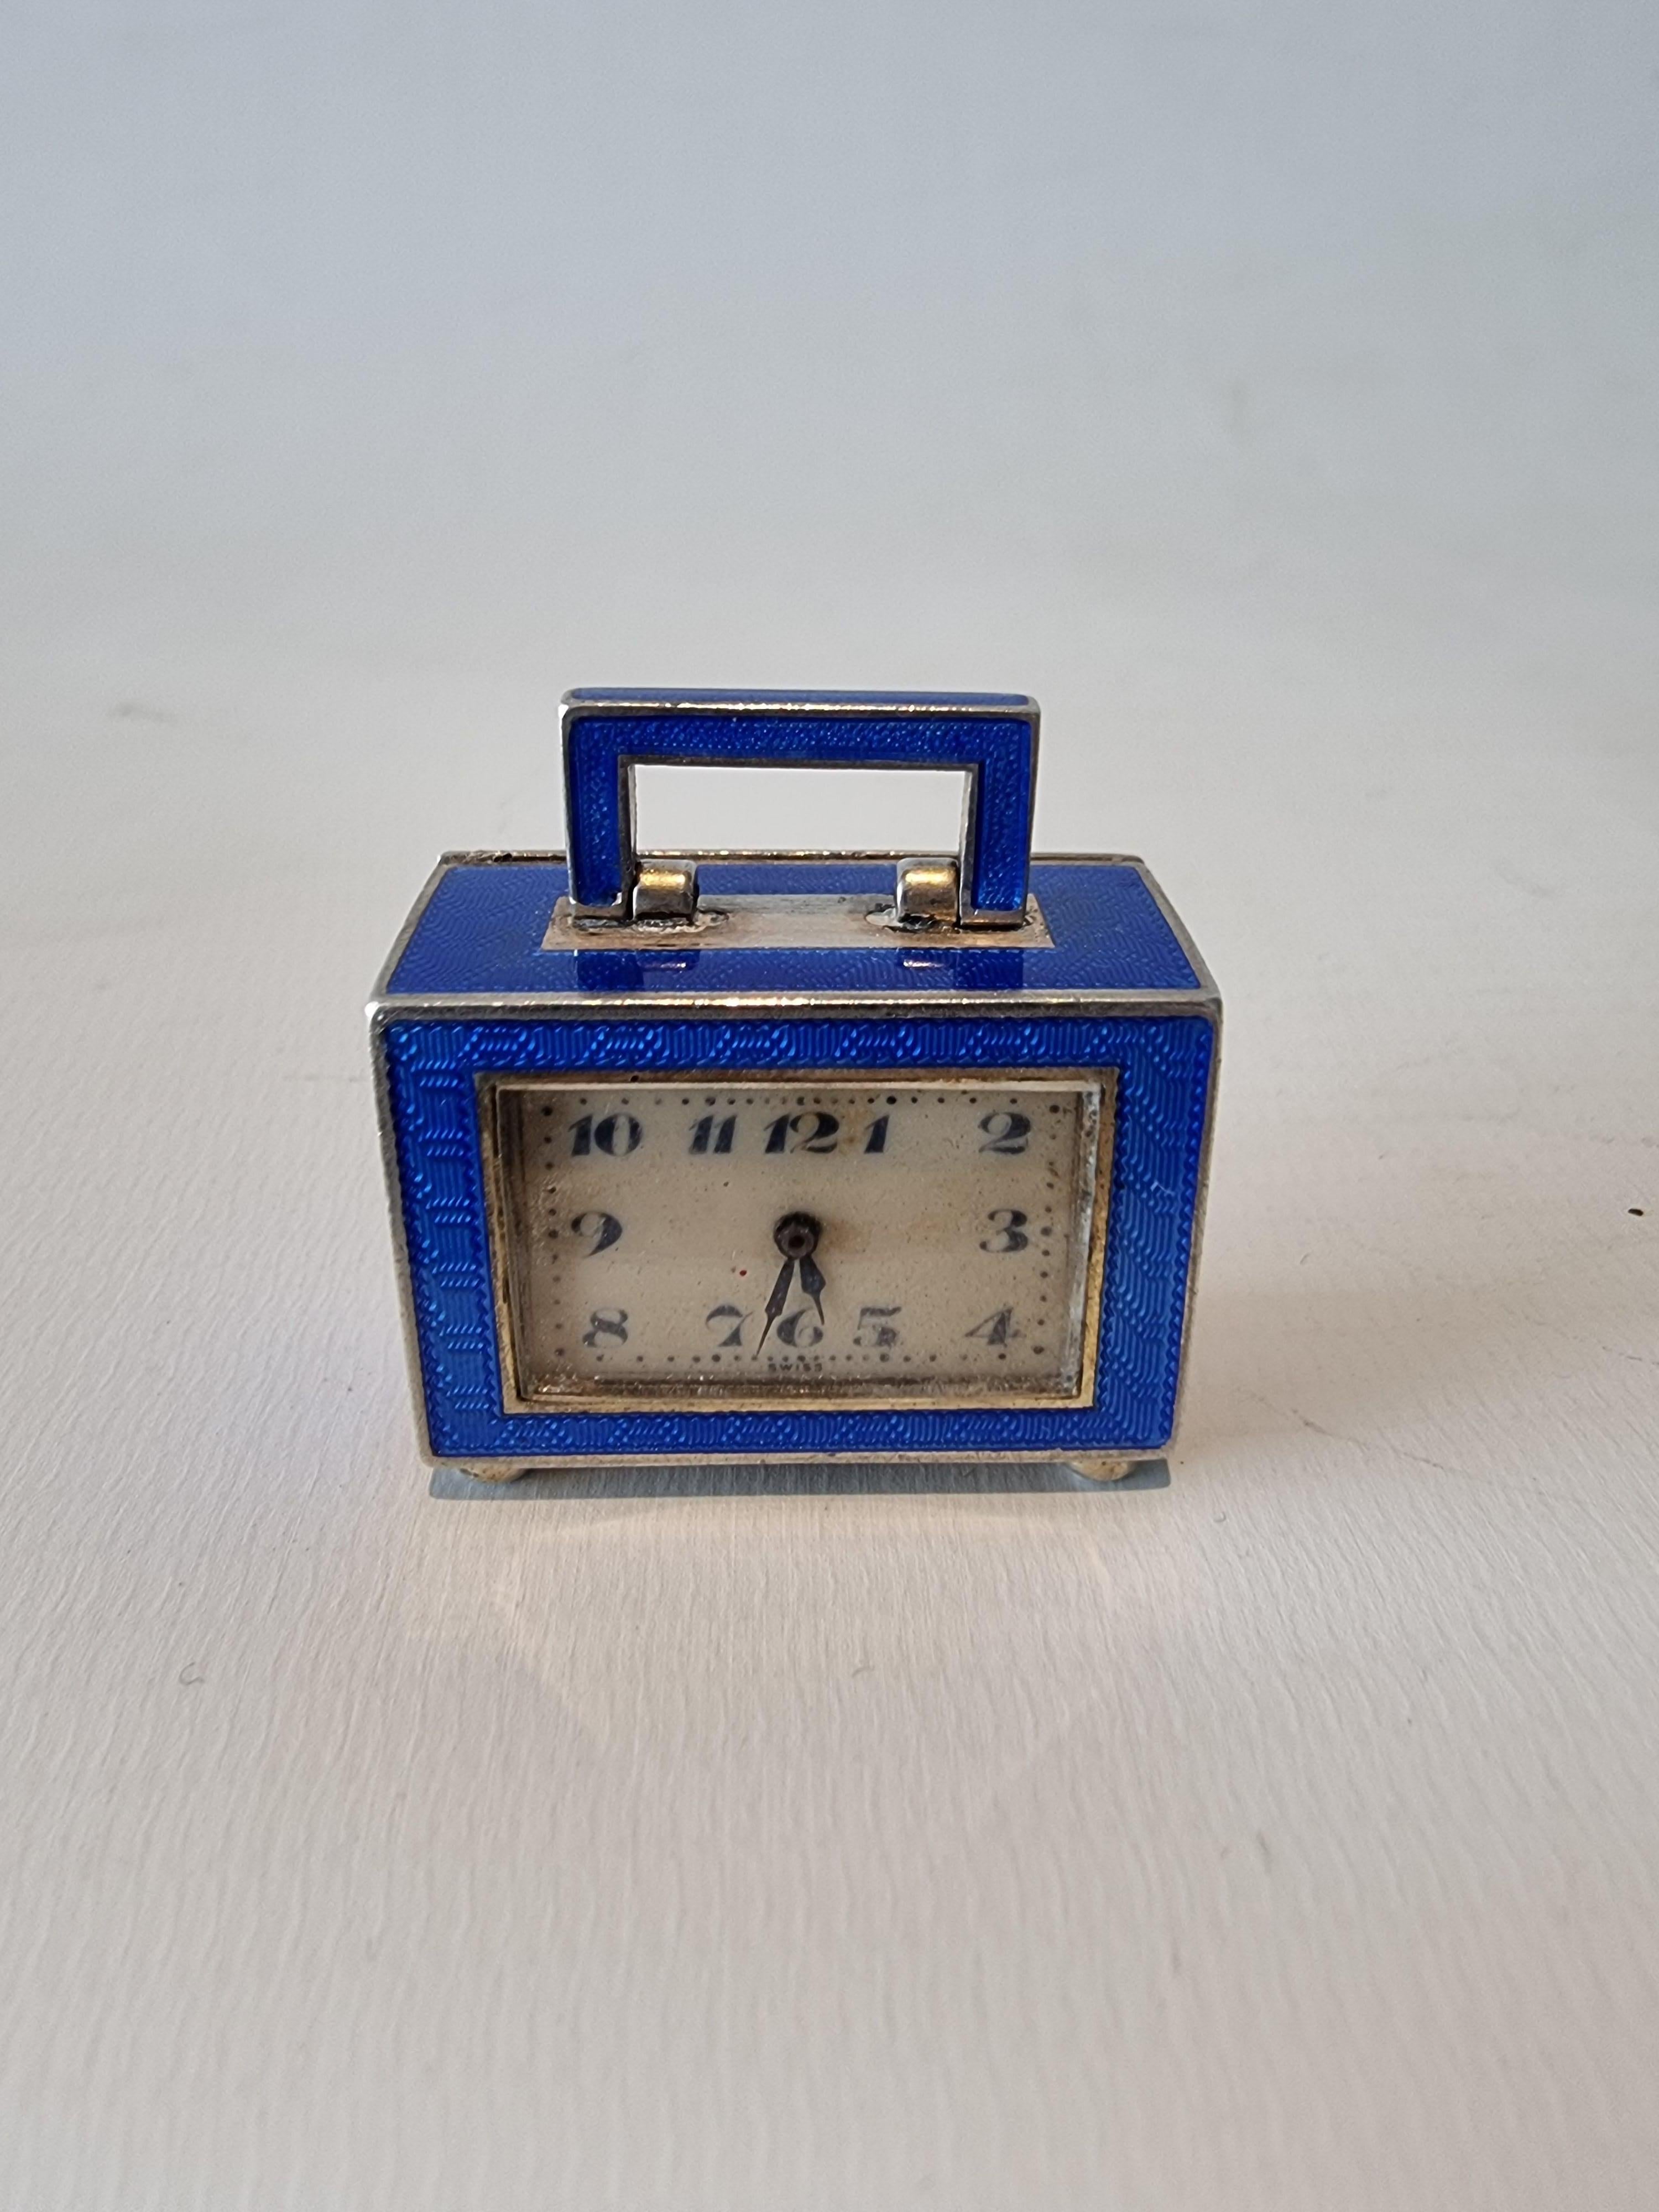 An absolutely tiny and exquisite sub miniature silver and blue guilloche enamel carriage, travel or boudoir clock by Juvenia. Juvenia are a luxury Swiss watchmaker.  Modeled almost as a suitcase, or briefcase, this is the smallest clock we have ever